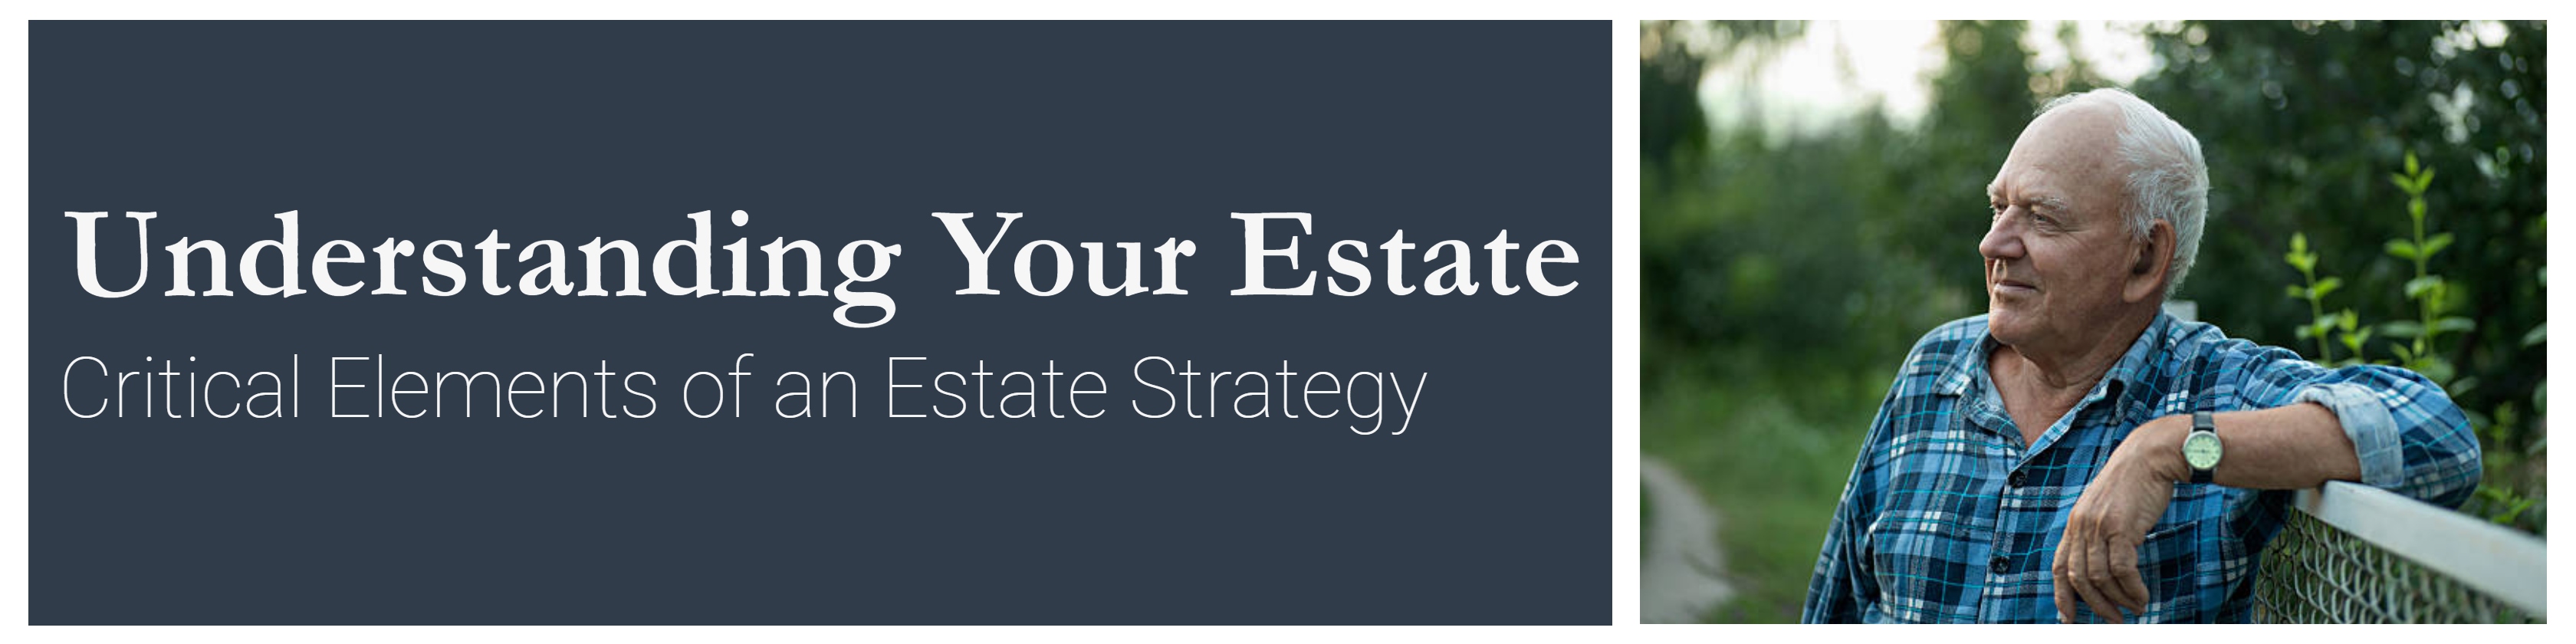 Understanding Your Estate: Critical Elements of an Estate Strategy 